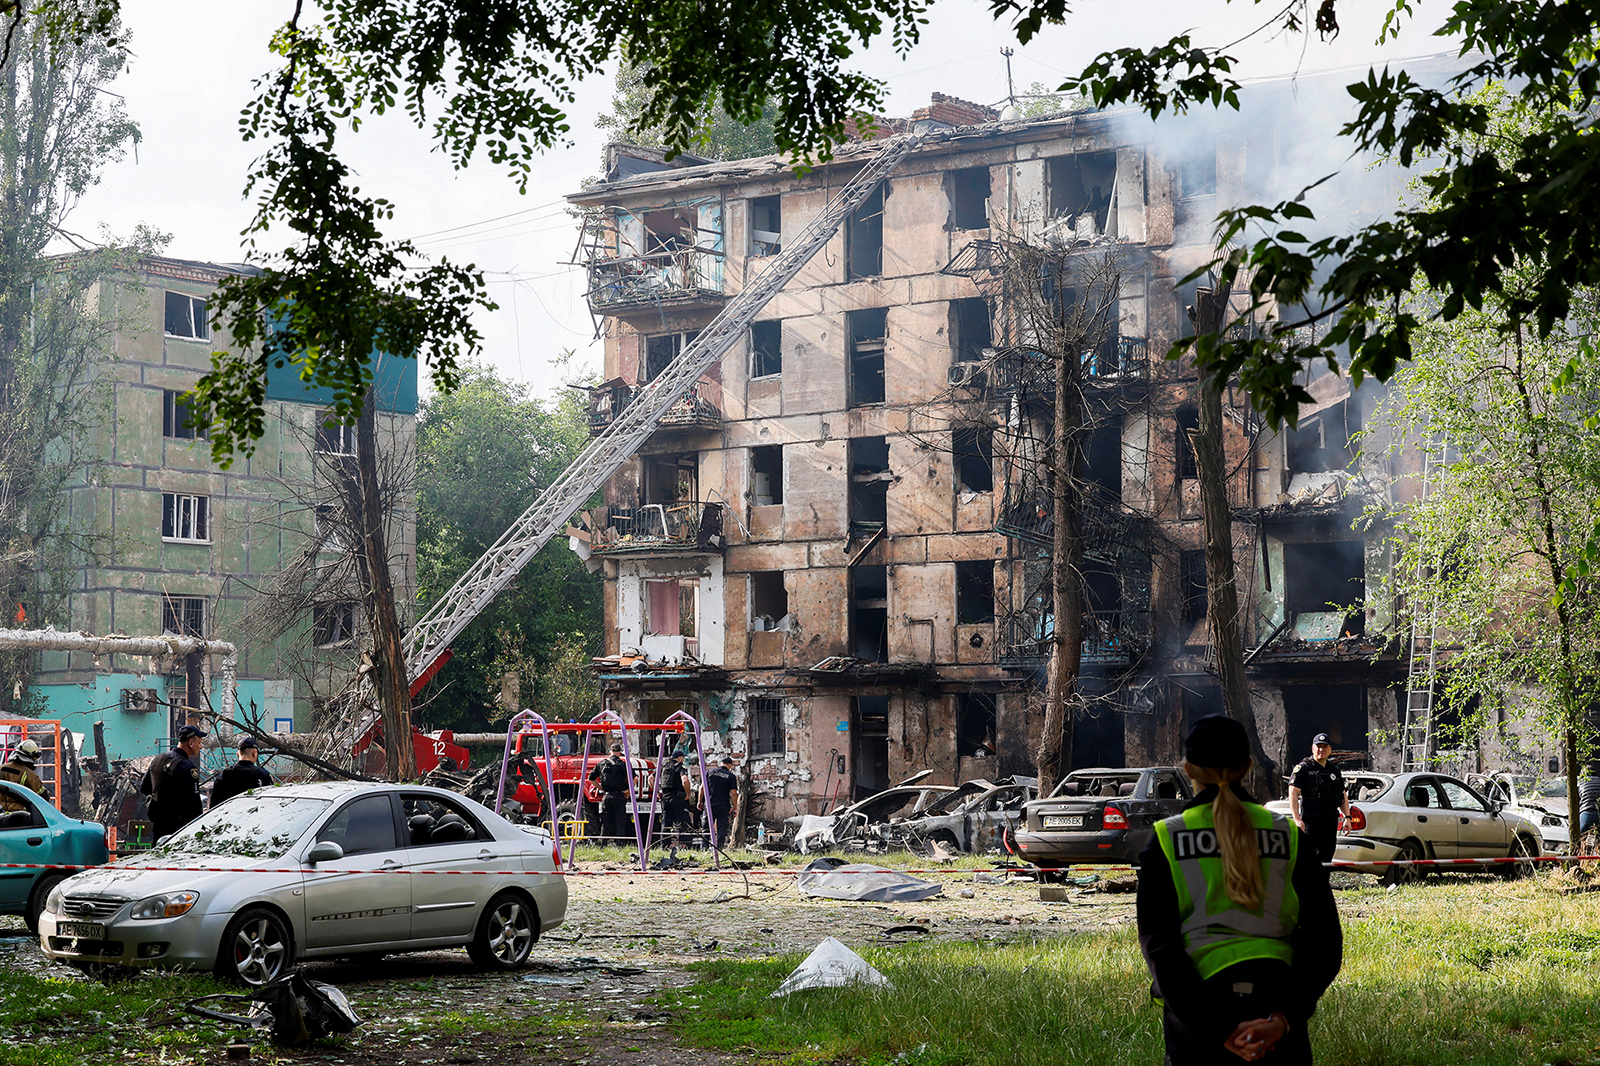 Rescuers work at a site of a residential building heavily damaged by a Russian missile strike in Kryvyi Rih, Dnipropetrovsk region, Ukraine, on June 13.